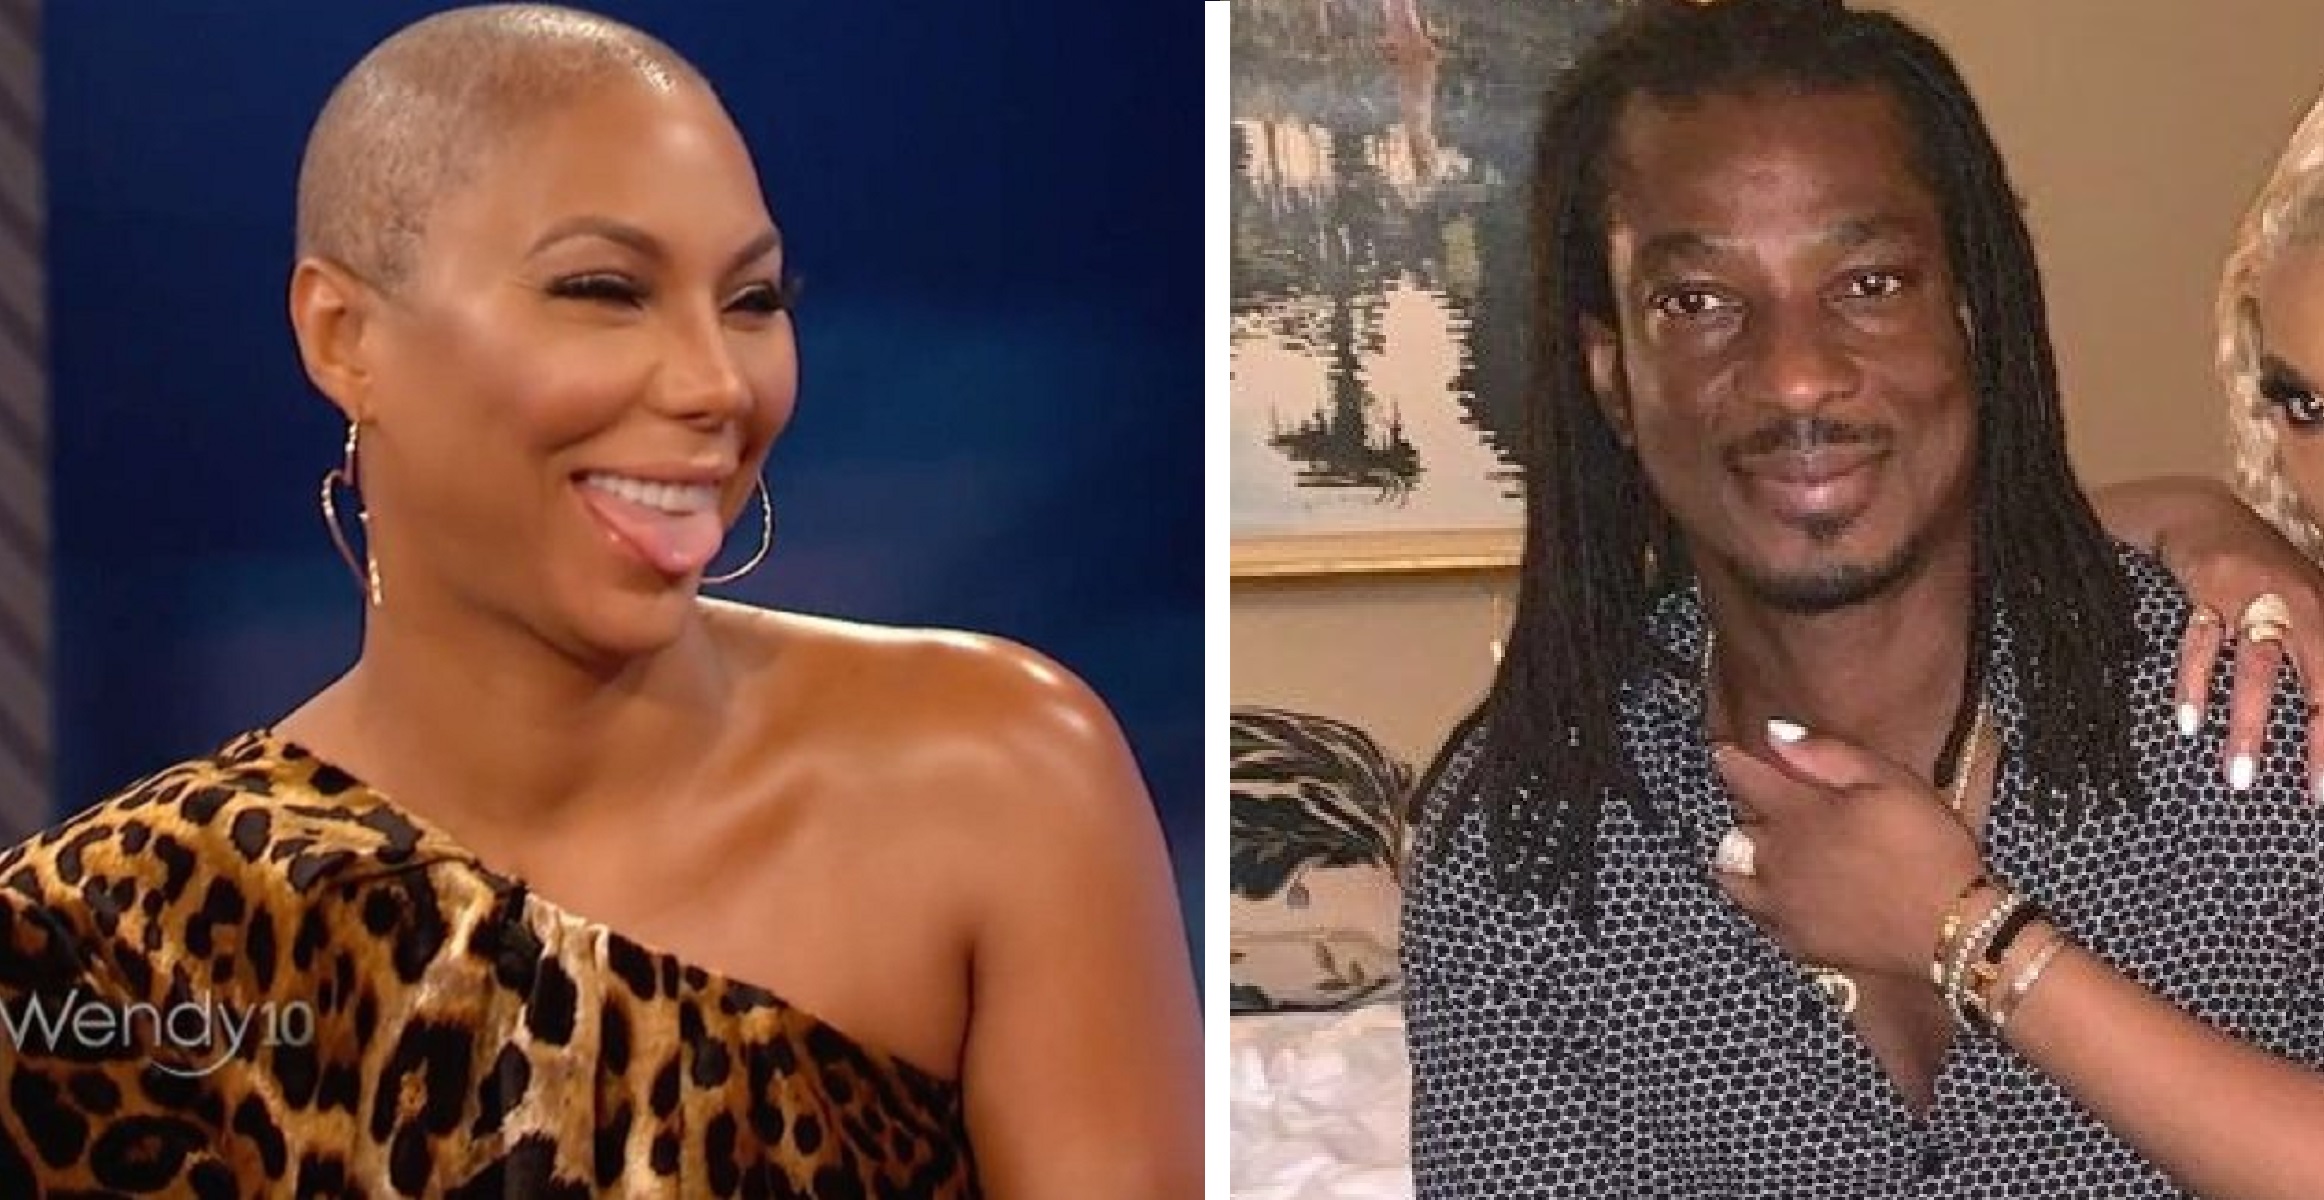 Tamar Braxton – ‘If Your Man Doesn’t Touch You For 3, 4, 10 Days, He Wants a D*ck’